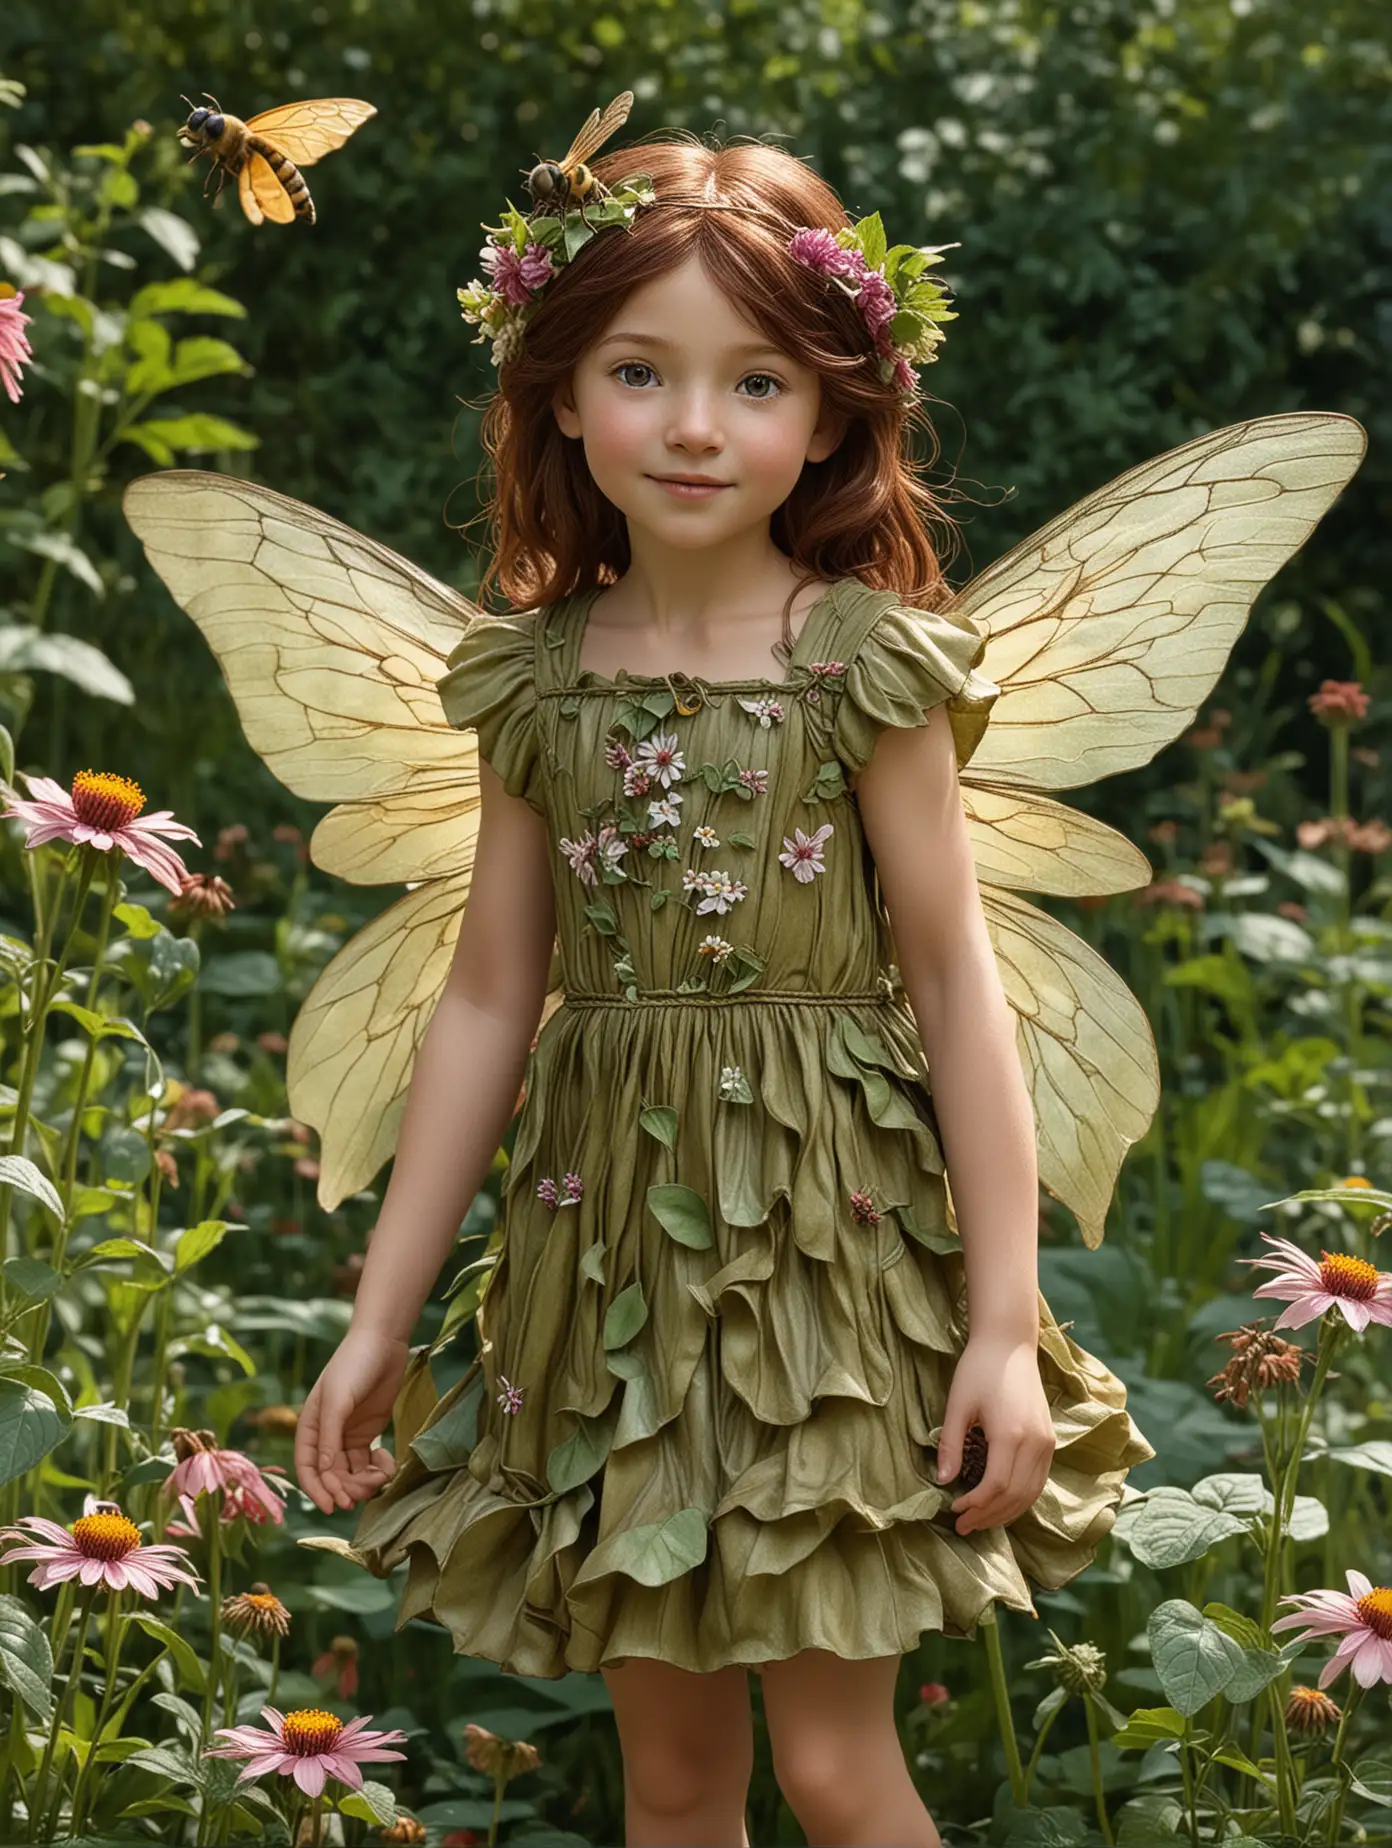 In the style of Cicely Mary Barker's Flower Fairies.
Photorealistic, full-length rendition of modern Garden Fairies.
Highly detailed. 8k. Hyper-realistic. Physically correct appendages. Physically correct facial features. Physically correct positioning.
Guardian of Bee Balm.
Age: 6 years
Skin hue: dark brown
Hair color: auburn
Hair type: 4a